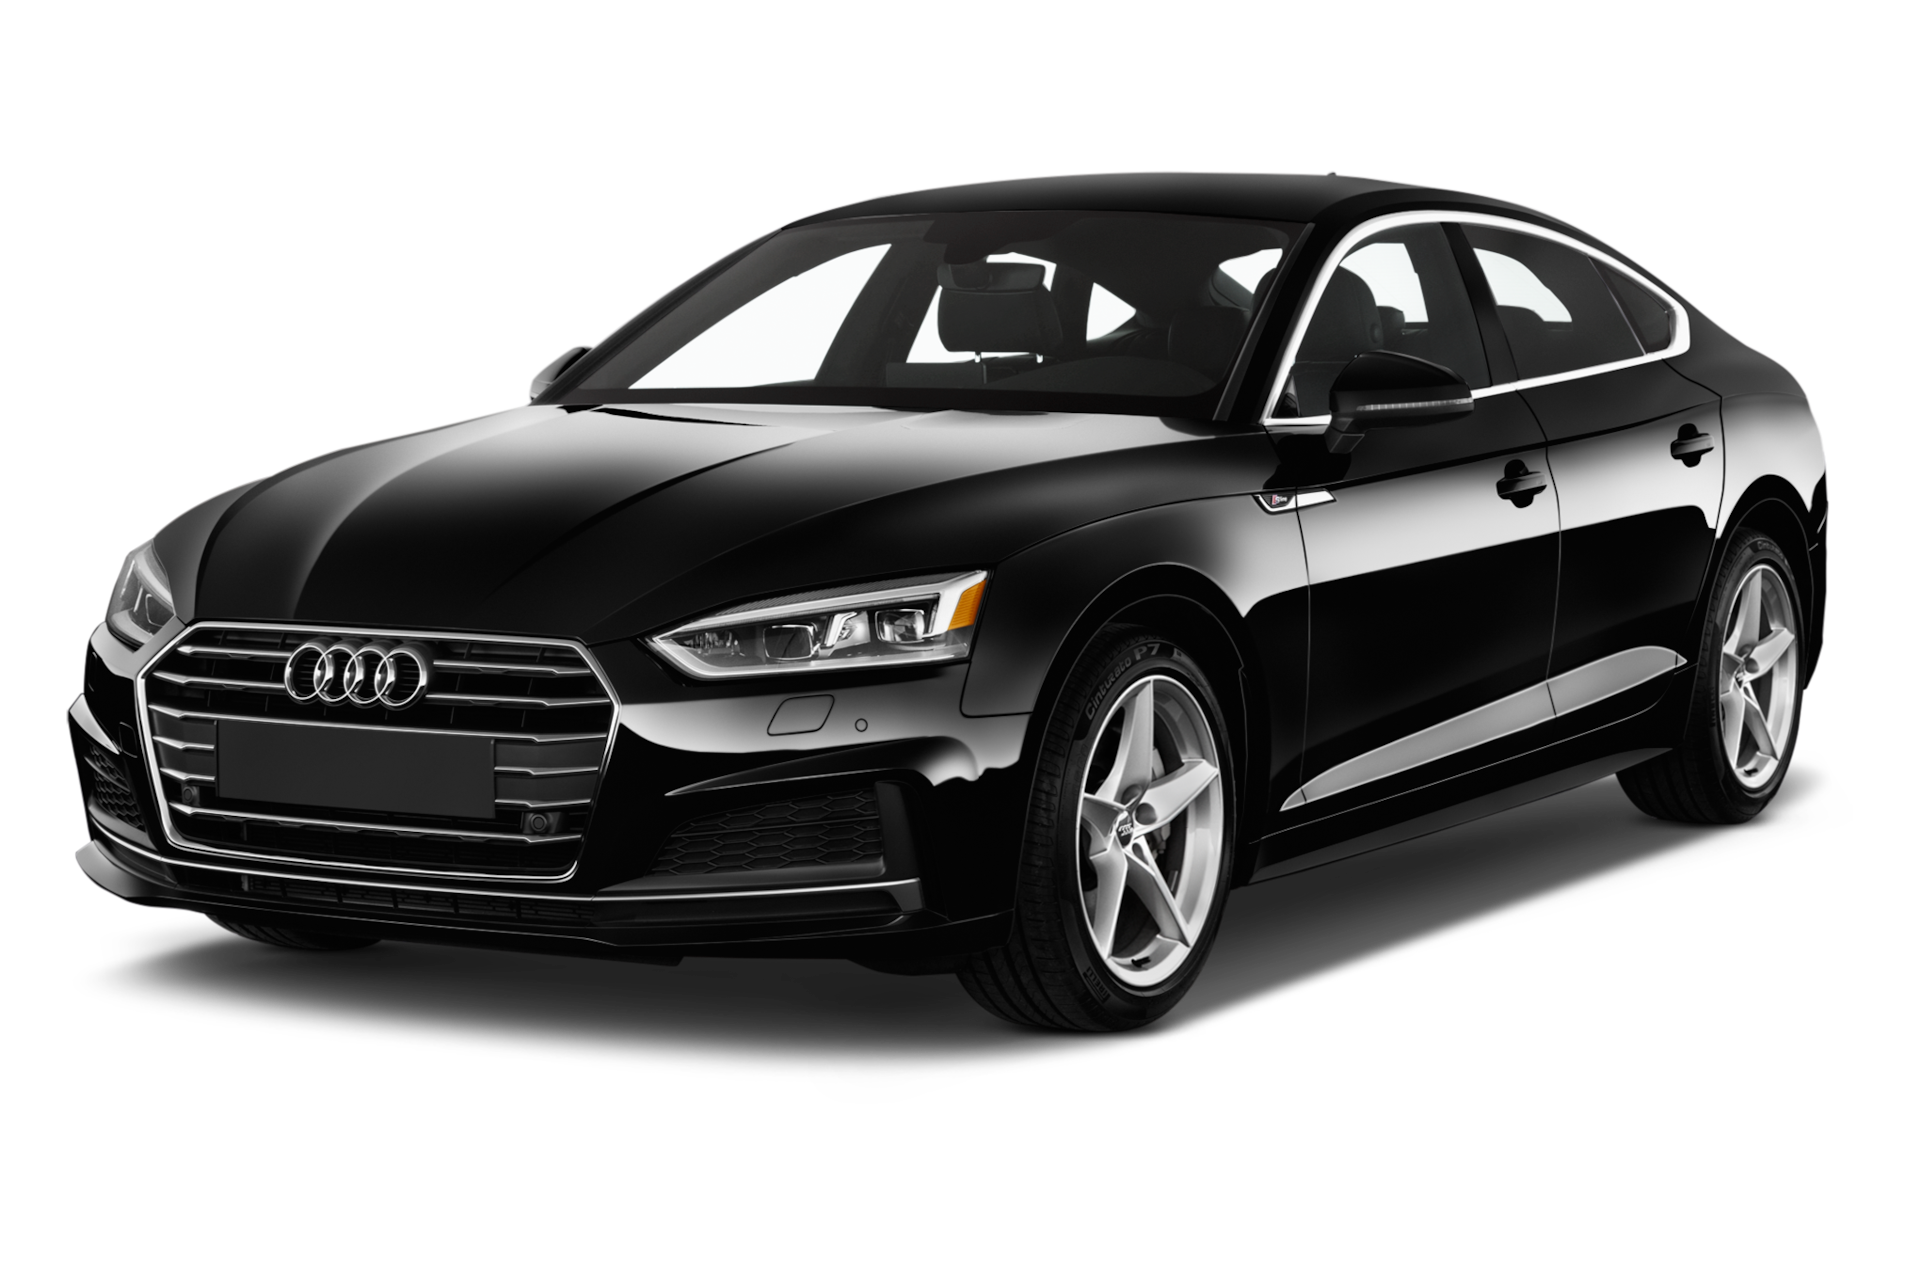 2019 Audi A5 Prices, Reviews, and Photos - MotorTrend